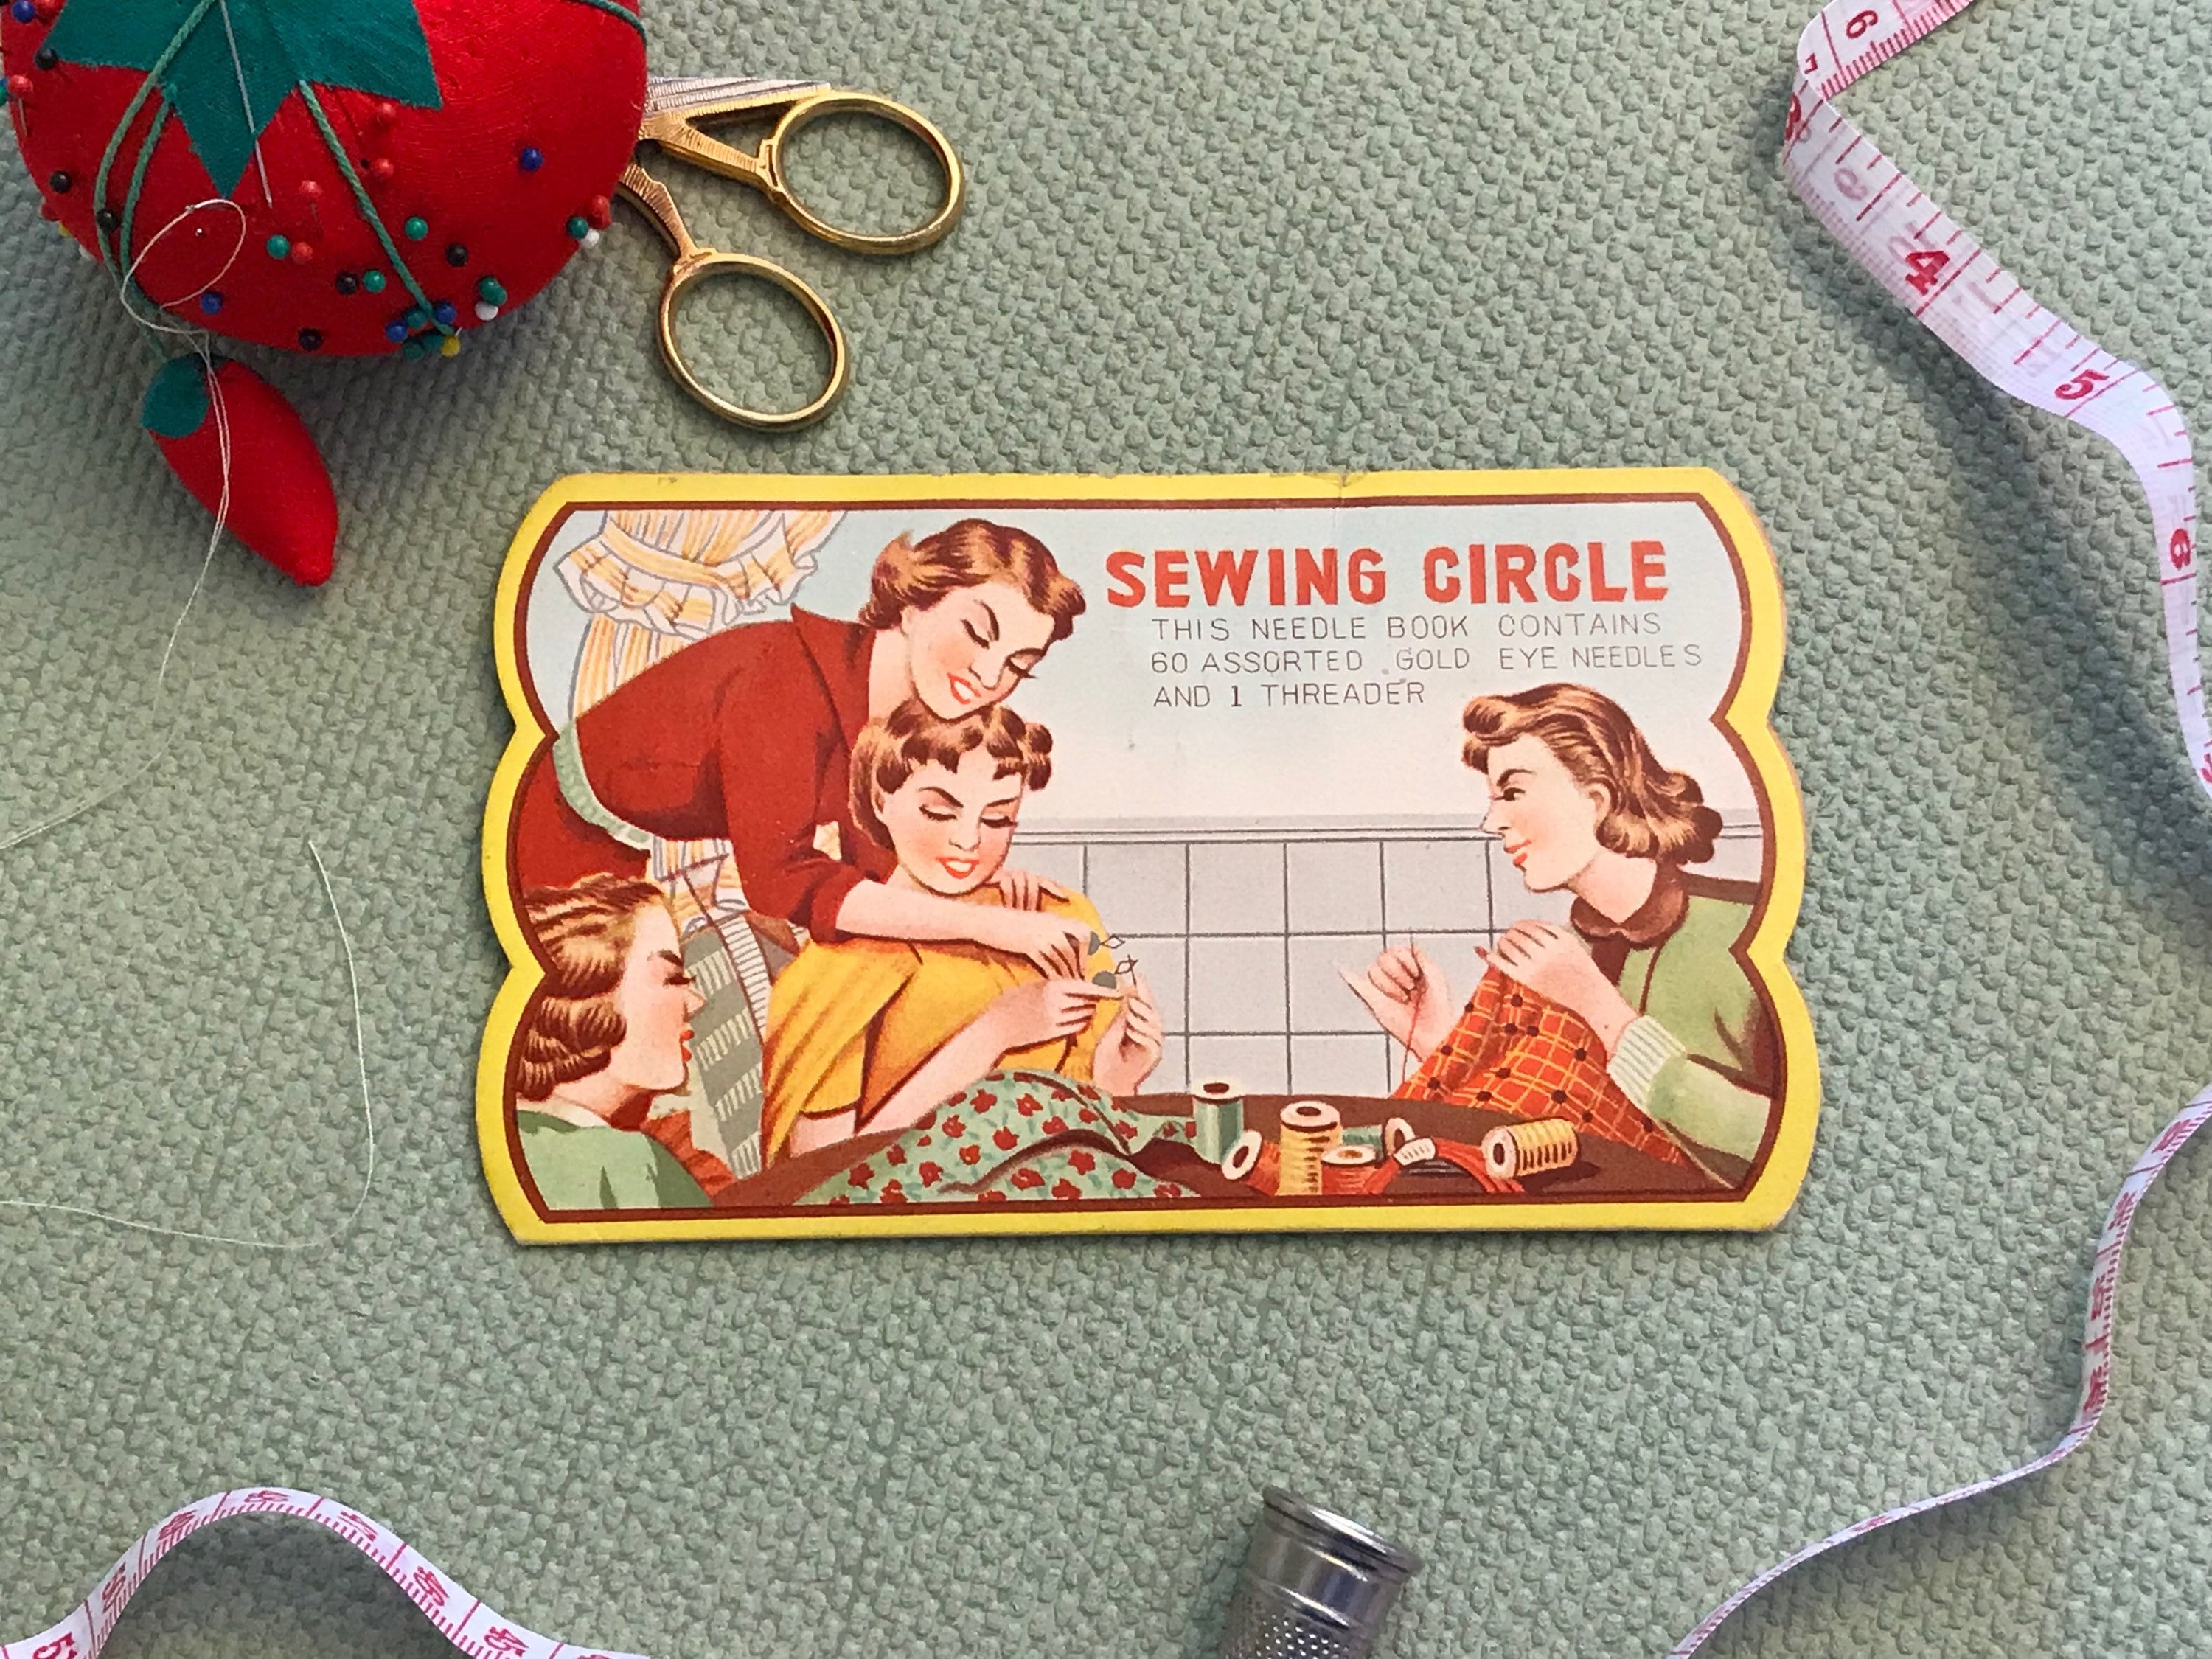 Vintage Sewing Needle Case, Sewing Circle Needles, collectible